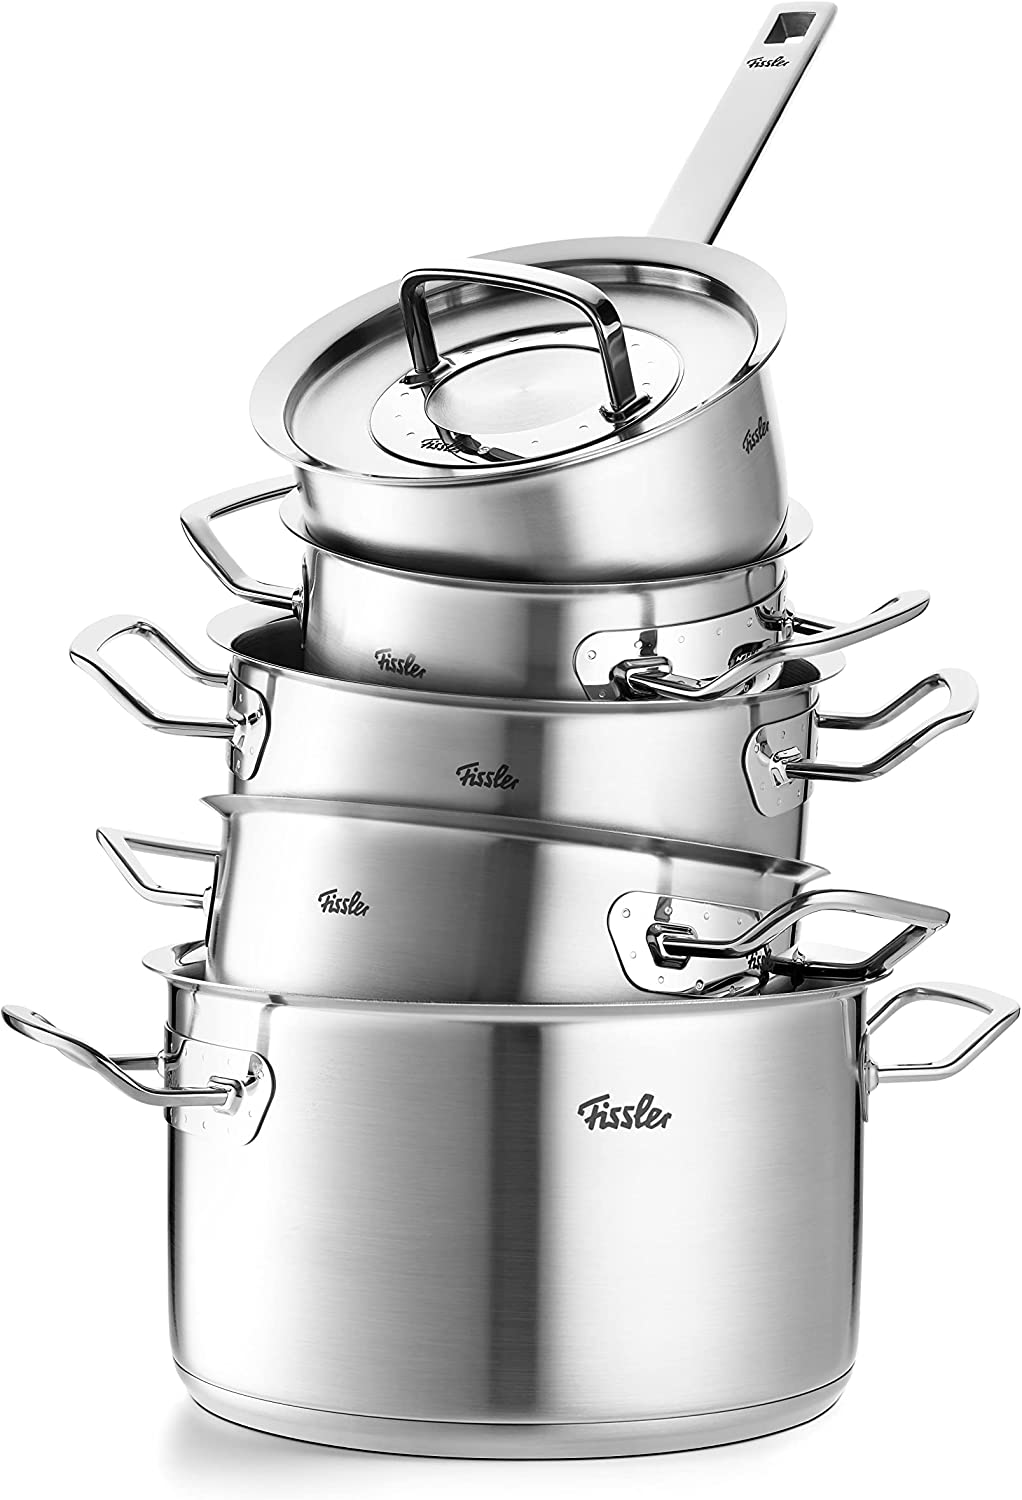 Fissler German Stainless Steel Set with Glass Lids 9 Piece